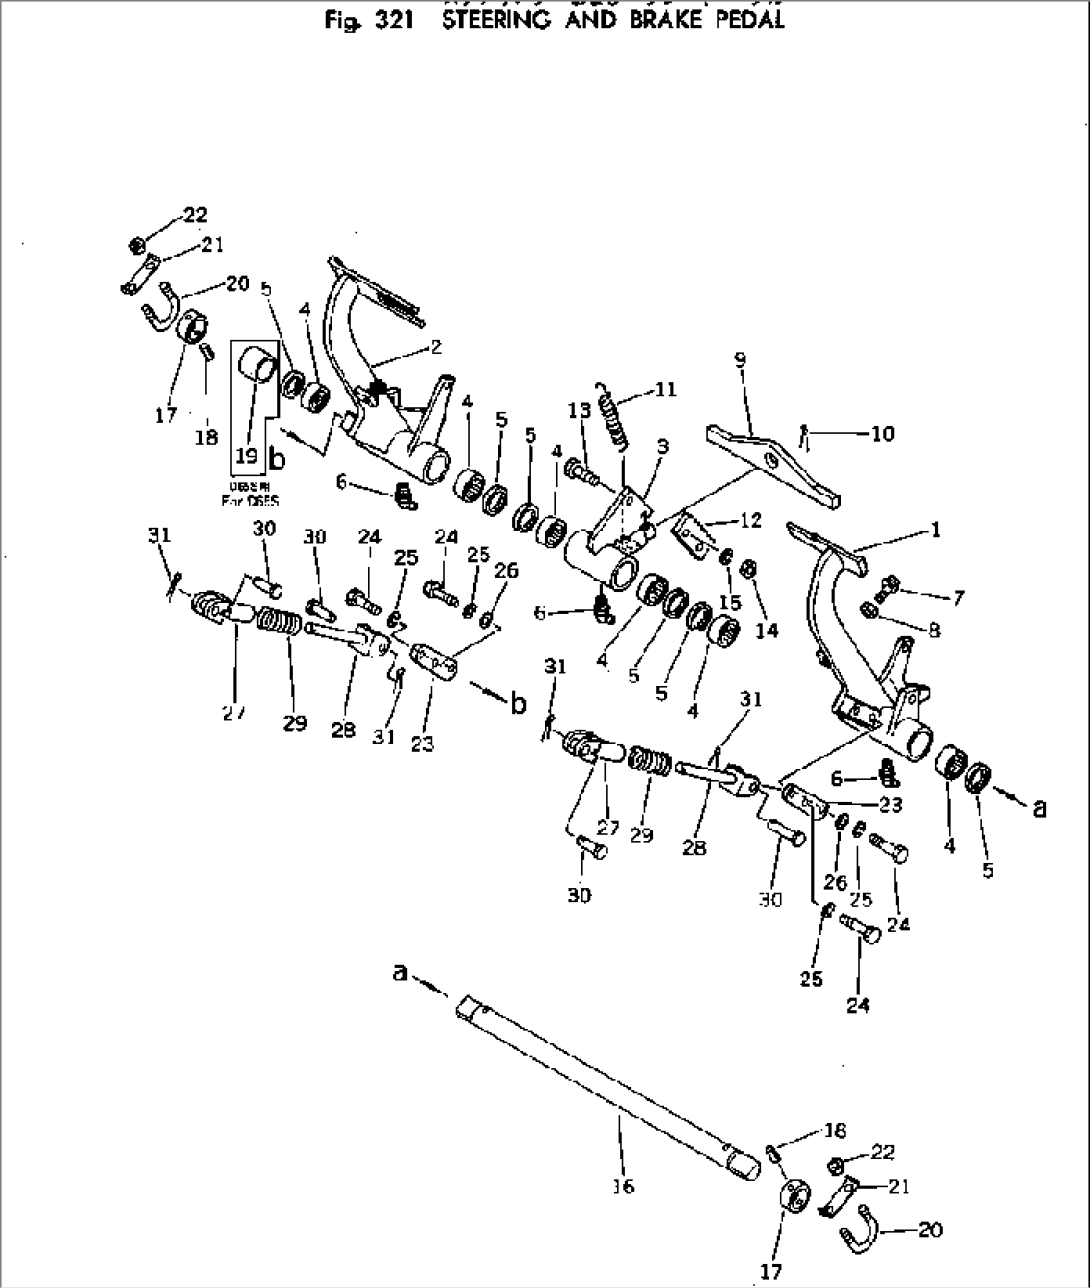 STEERING AND BRAKE PEDAL